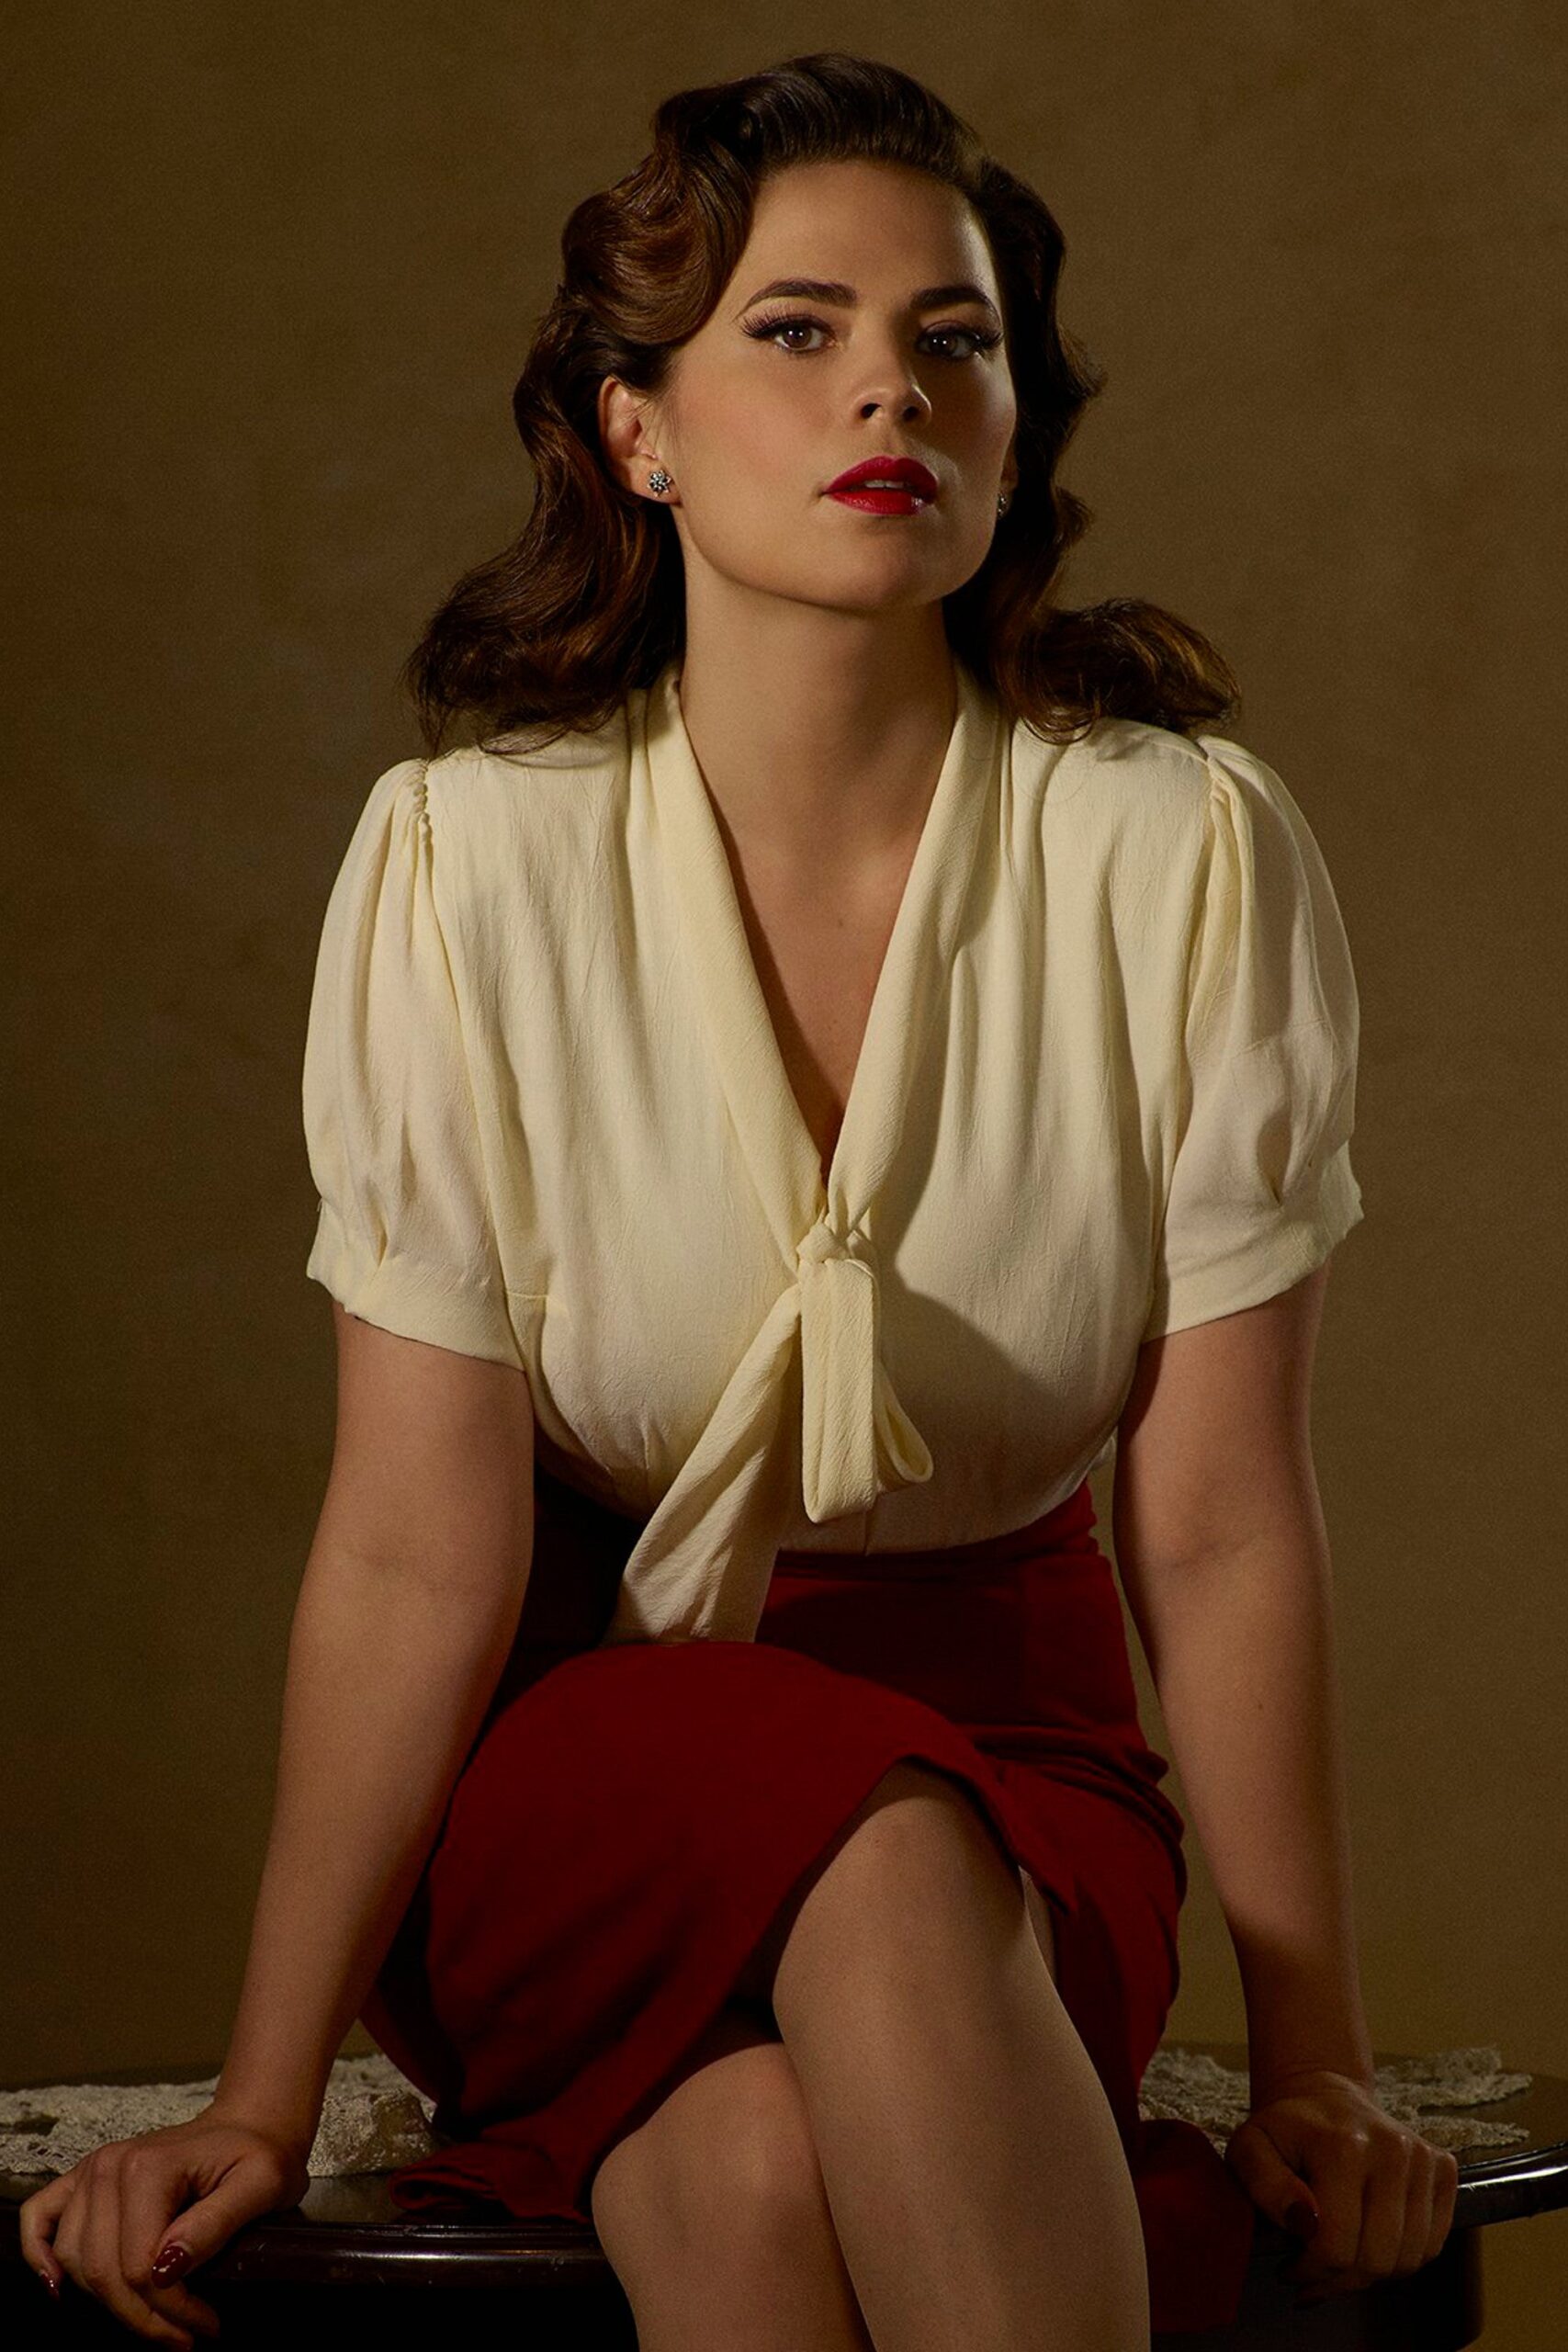 Hayley Atwell would have made a great 1940s pin up model